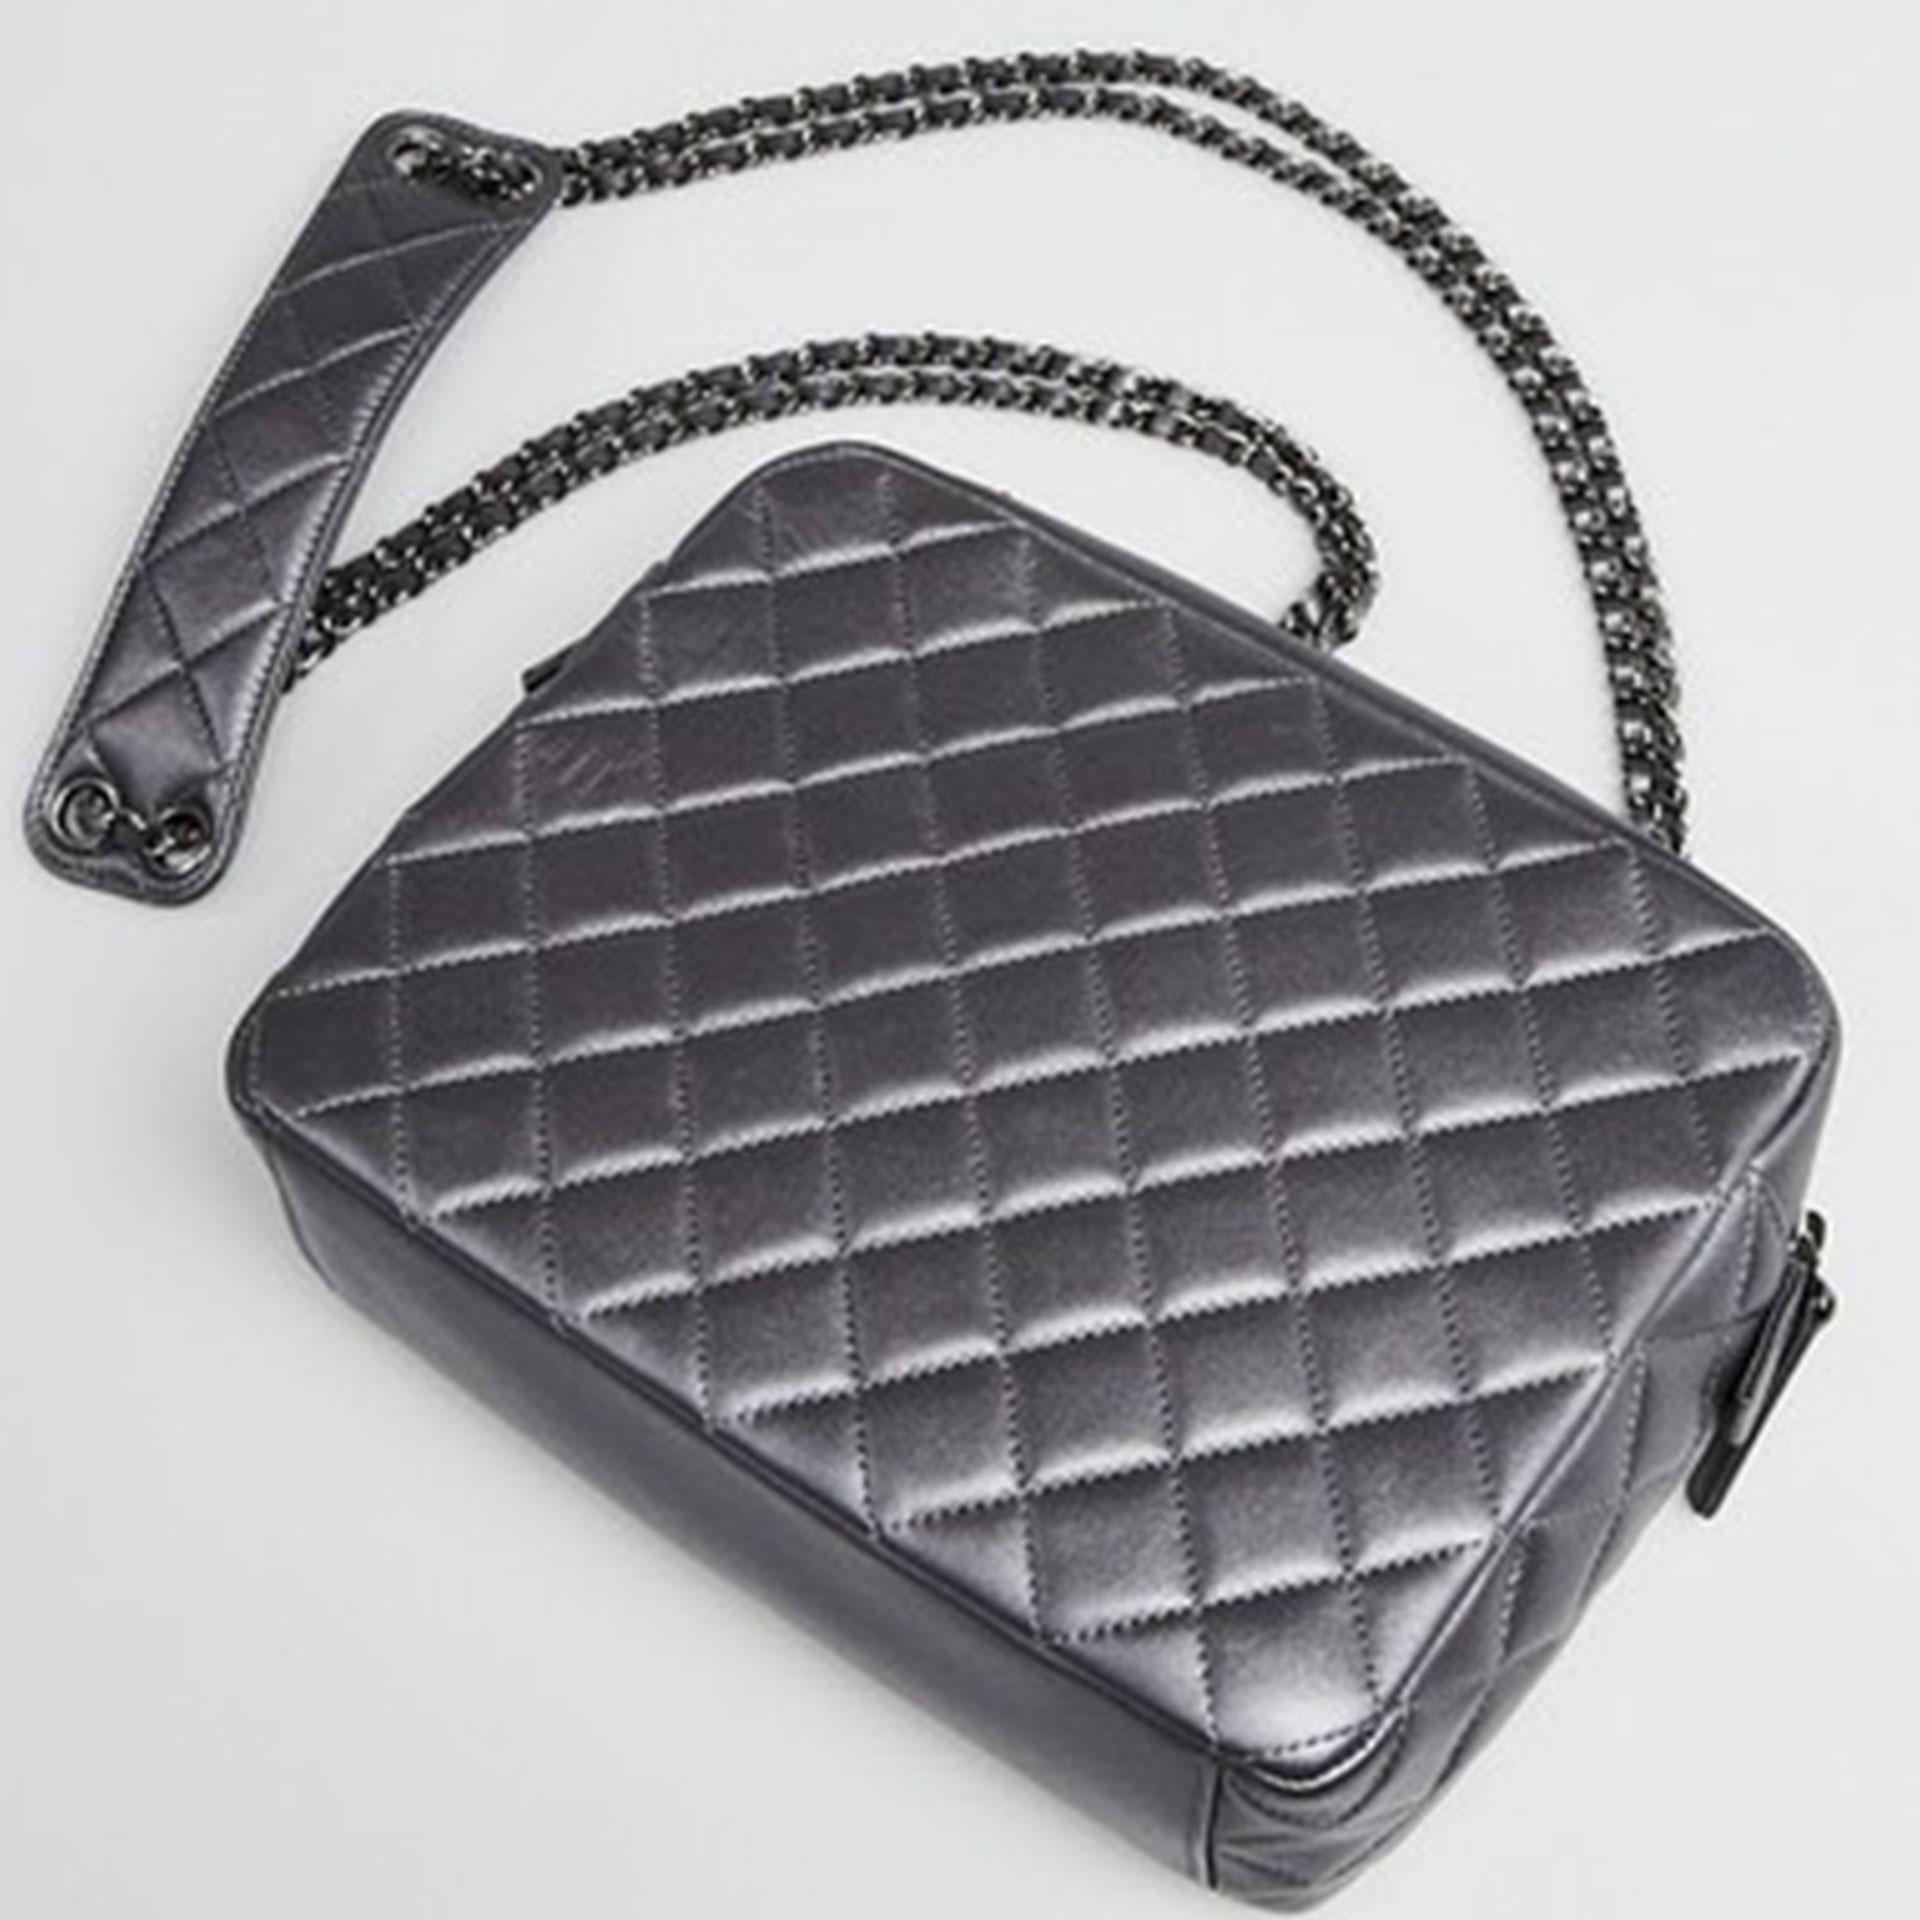 Quilted metallic leather with resin details
Includes: Box and authenticity card
2014
Interwoven retractable chain straps
Single zip closure
Microfiber interior lining
One interior main zippered pocket
Two open pockets
Handle drop: 20